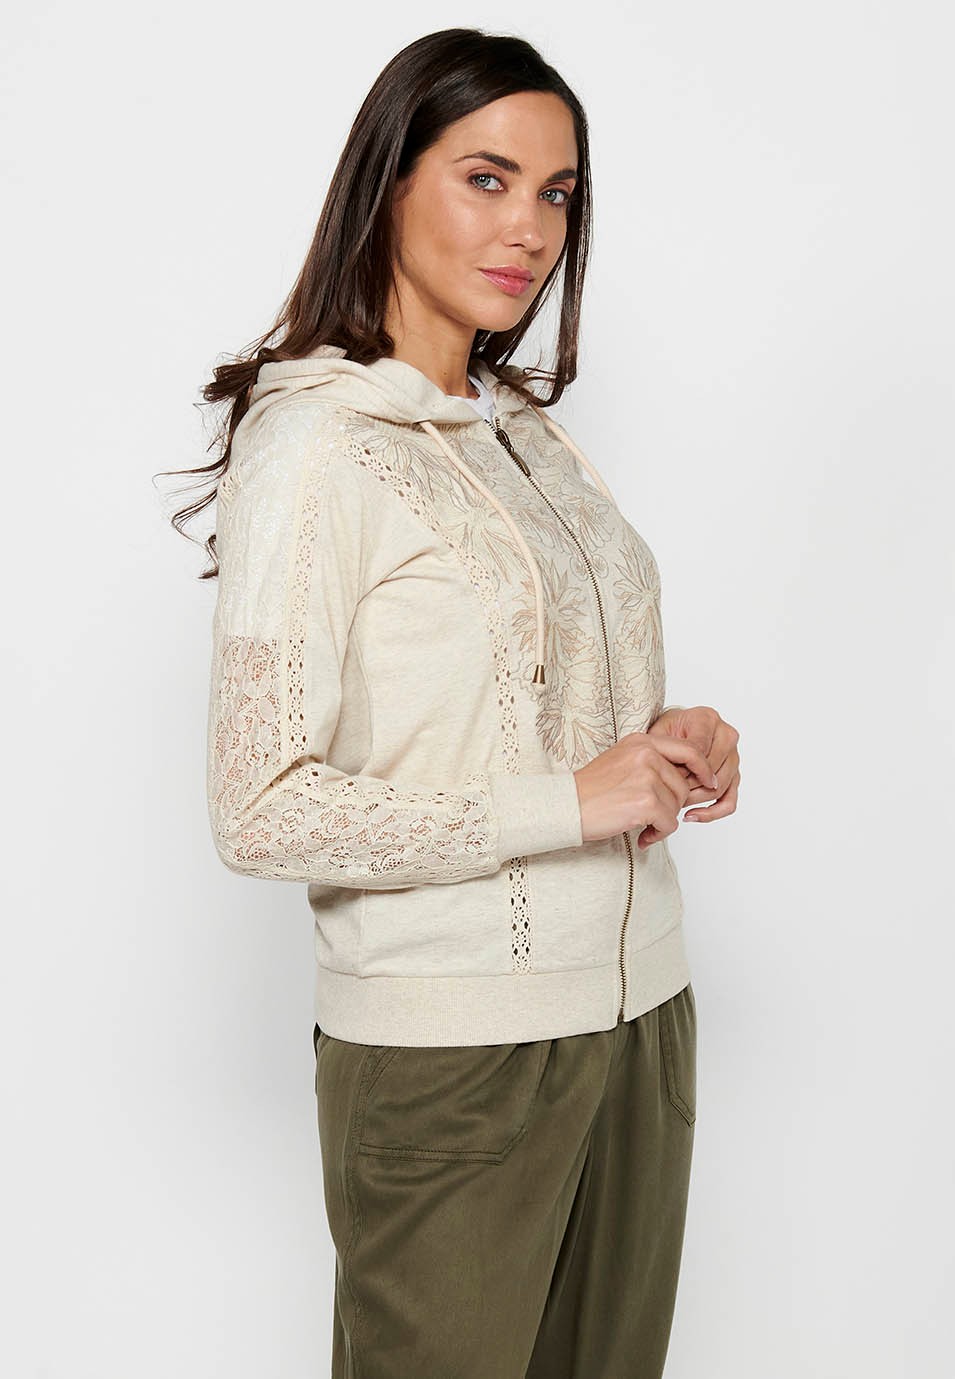 Jacket Sweatshirt with Front Zipper Closure with Lace Details and Stone Color Hooded Collar for Women 2